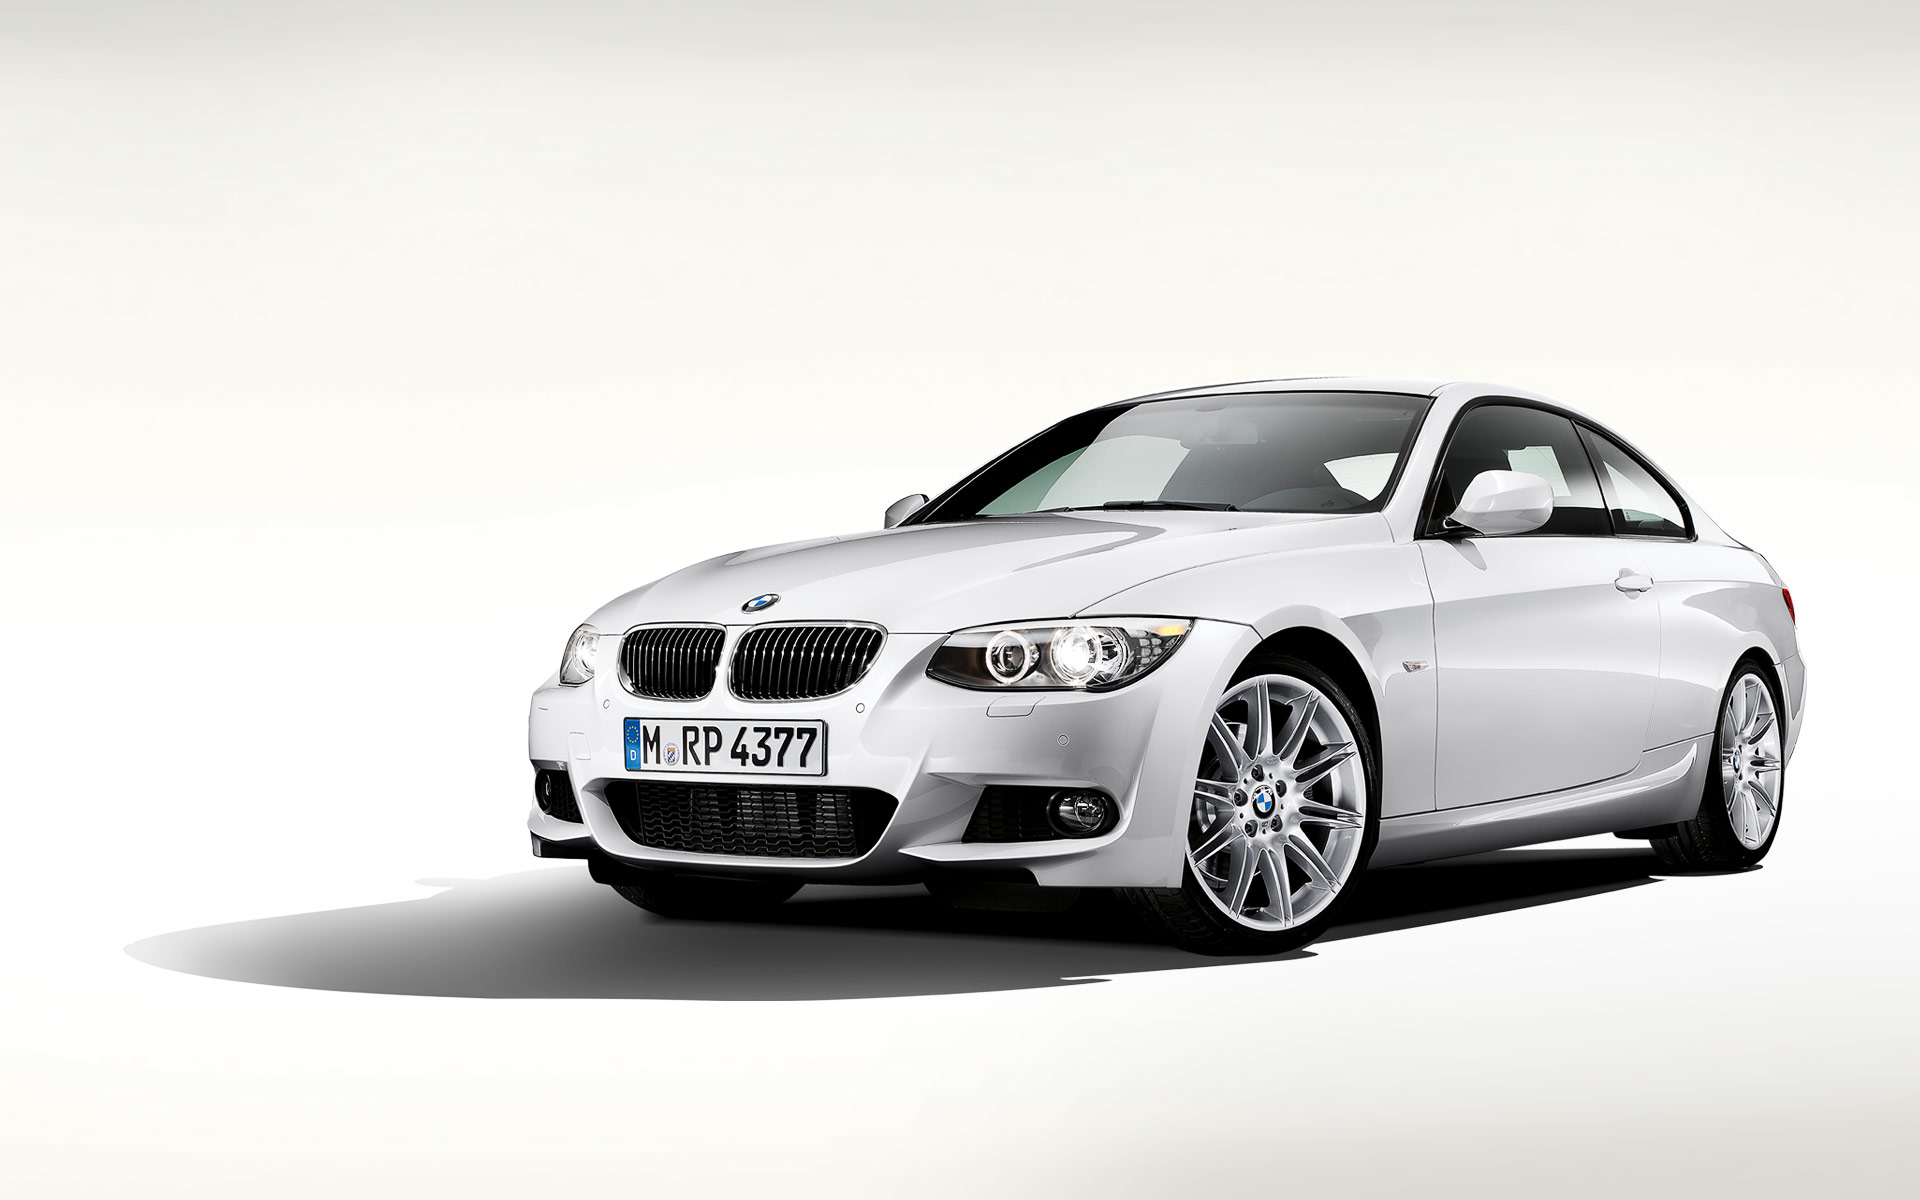 Wallpaper Update: BMW 3-Series LCI Coupe with M-Sport | BIMMERPOST ...